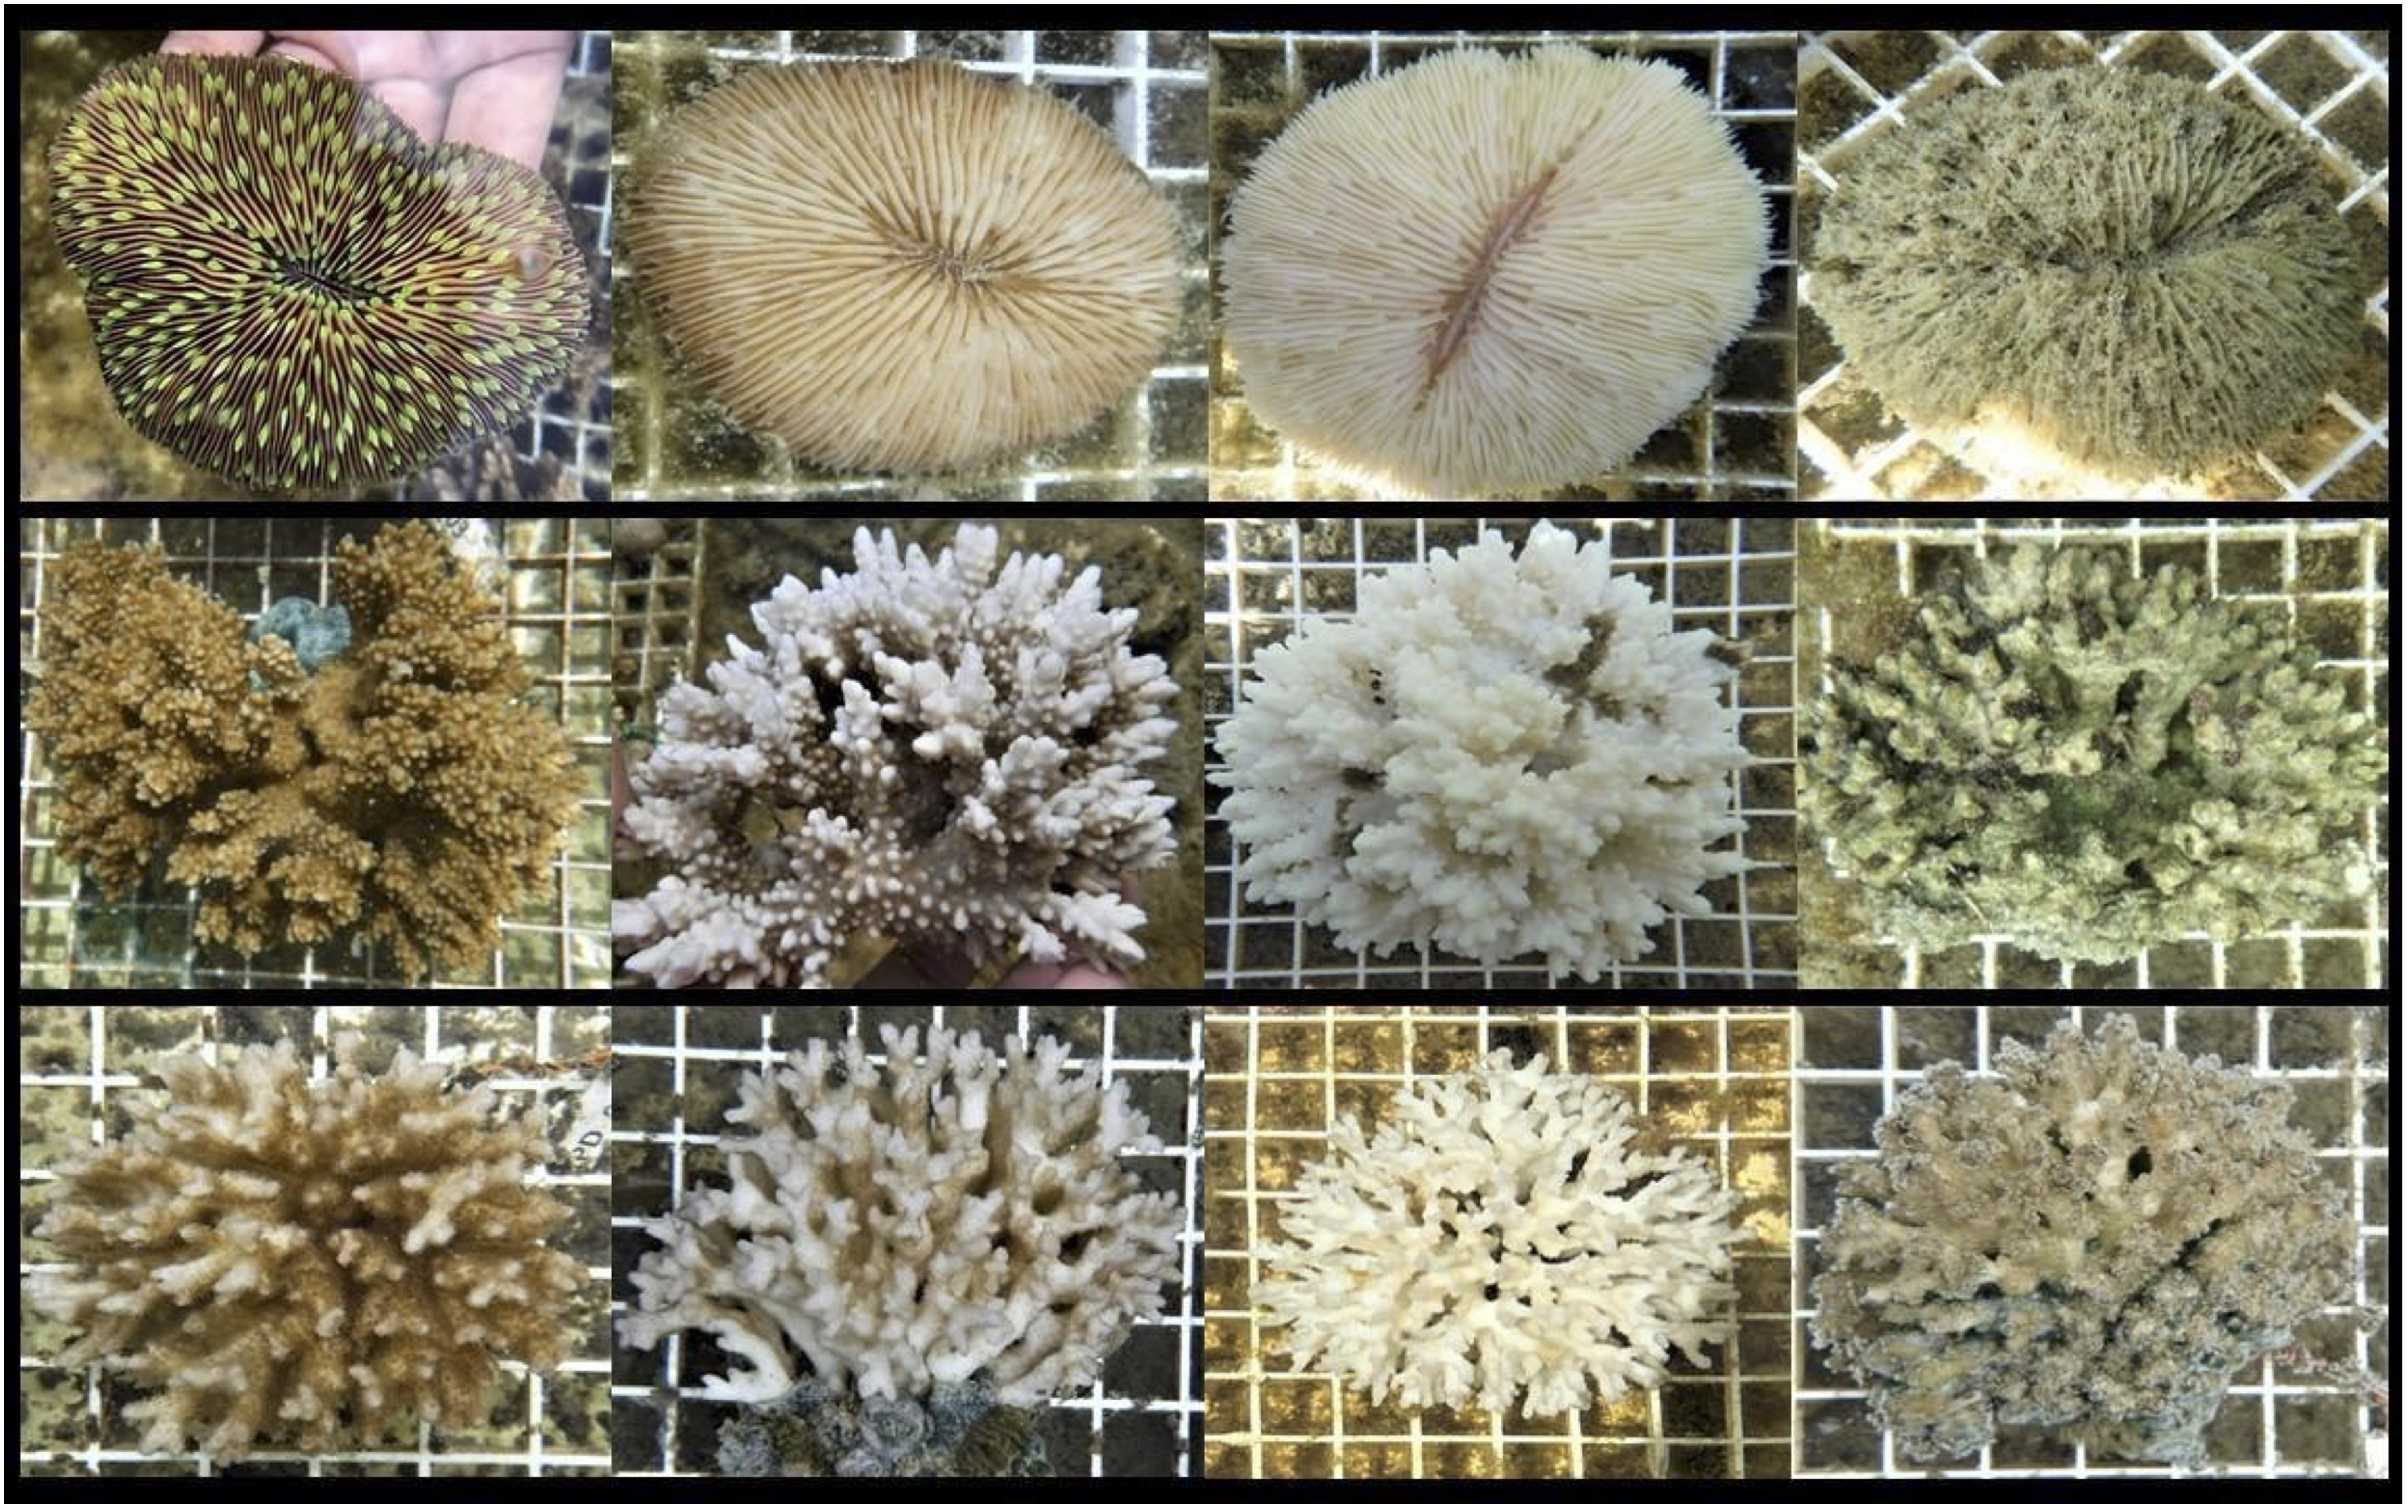 Low-level nutrient enrichment during thermal stress delays bleaching and  ameliorates calcification in three Hawaiian reef coral species [PeerJ]